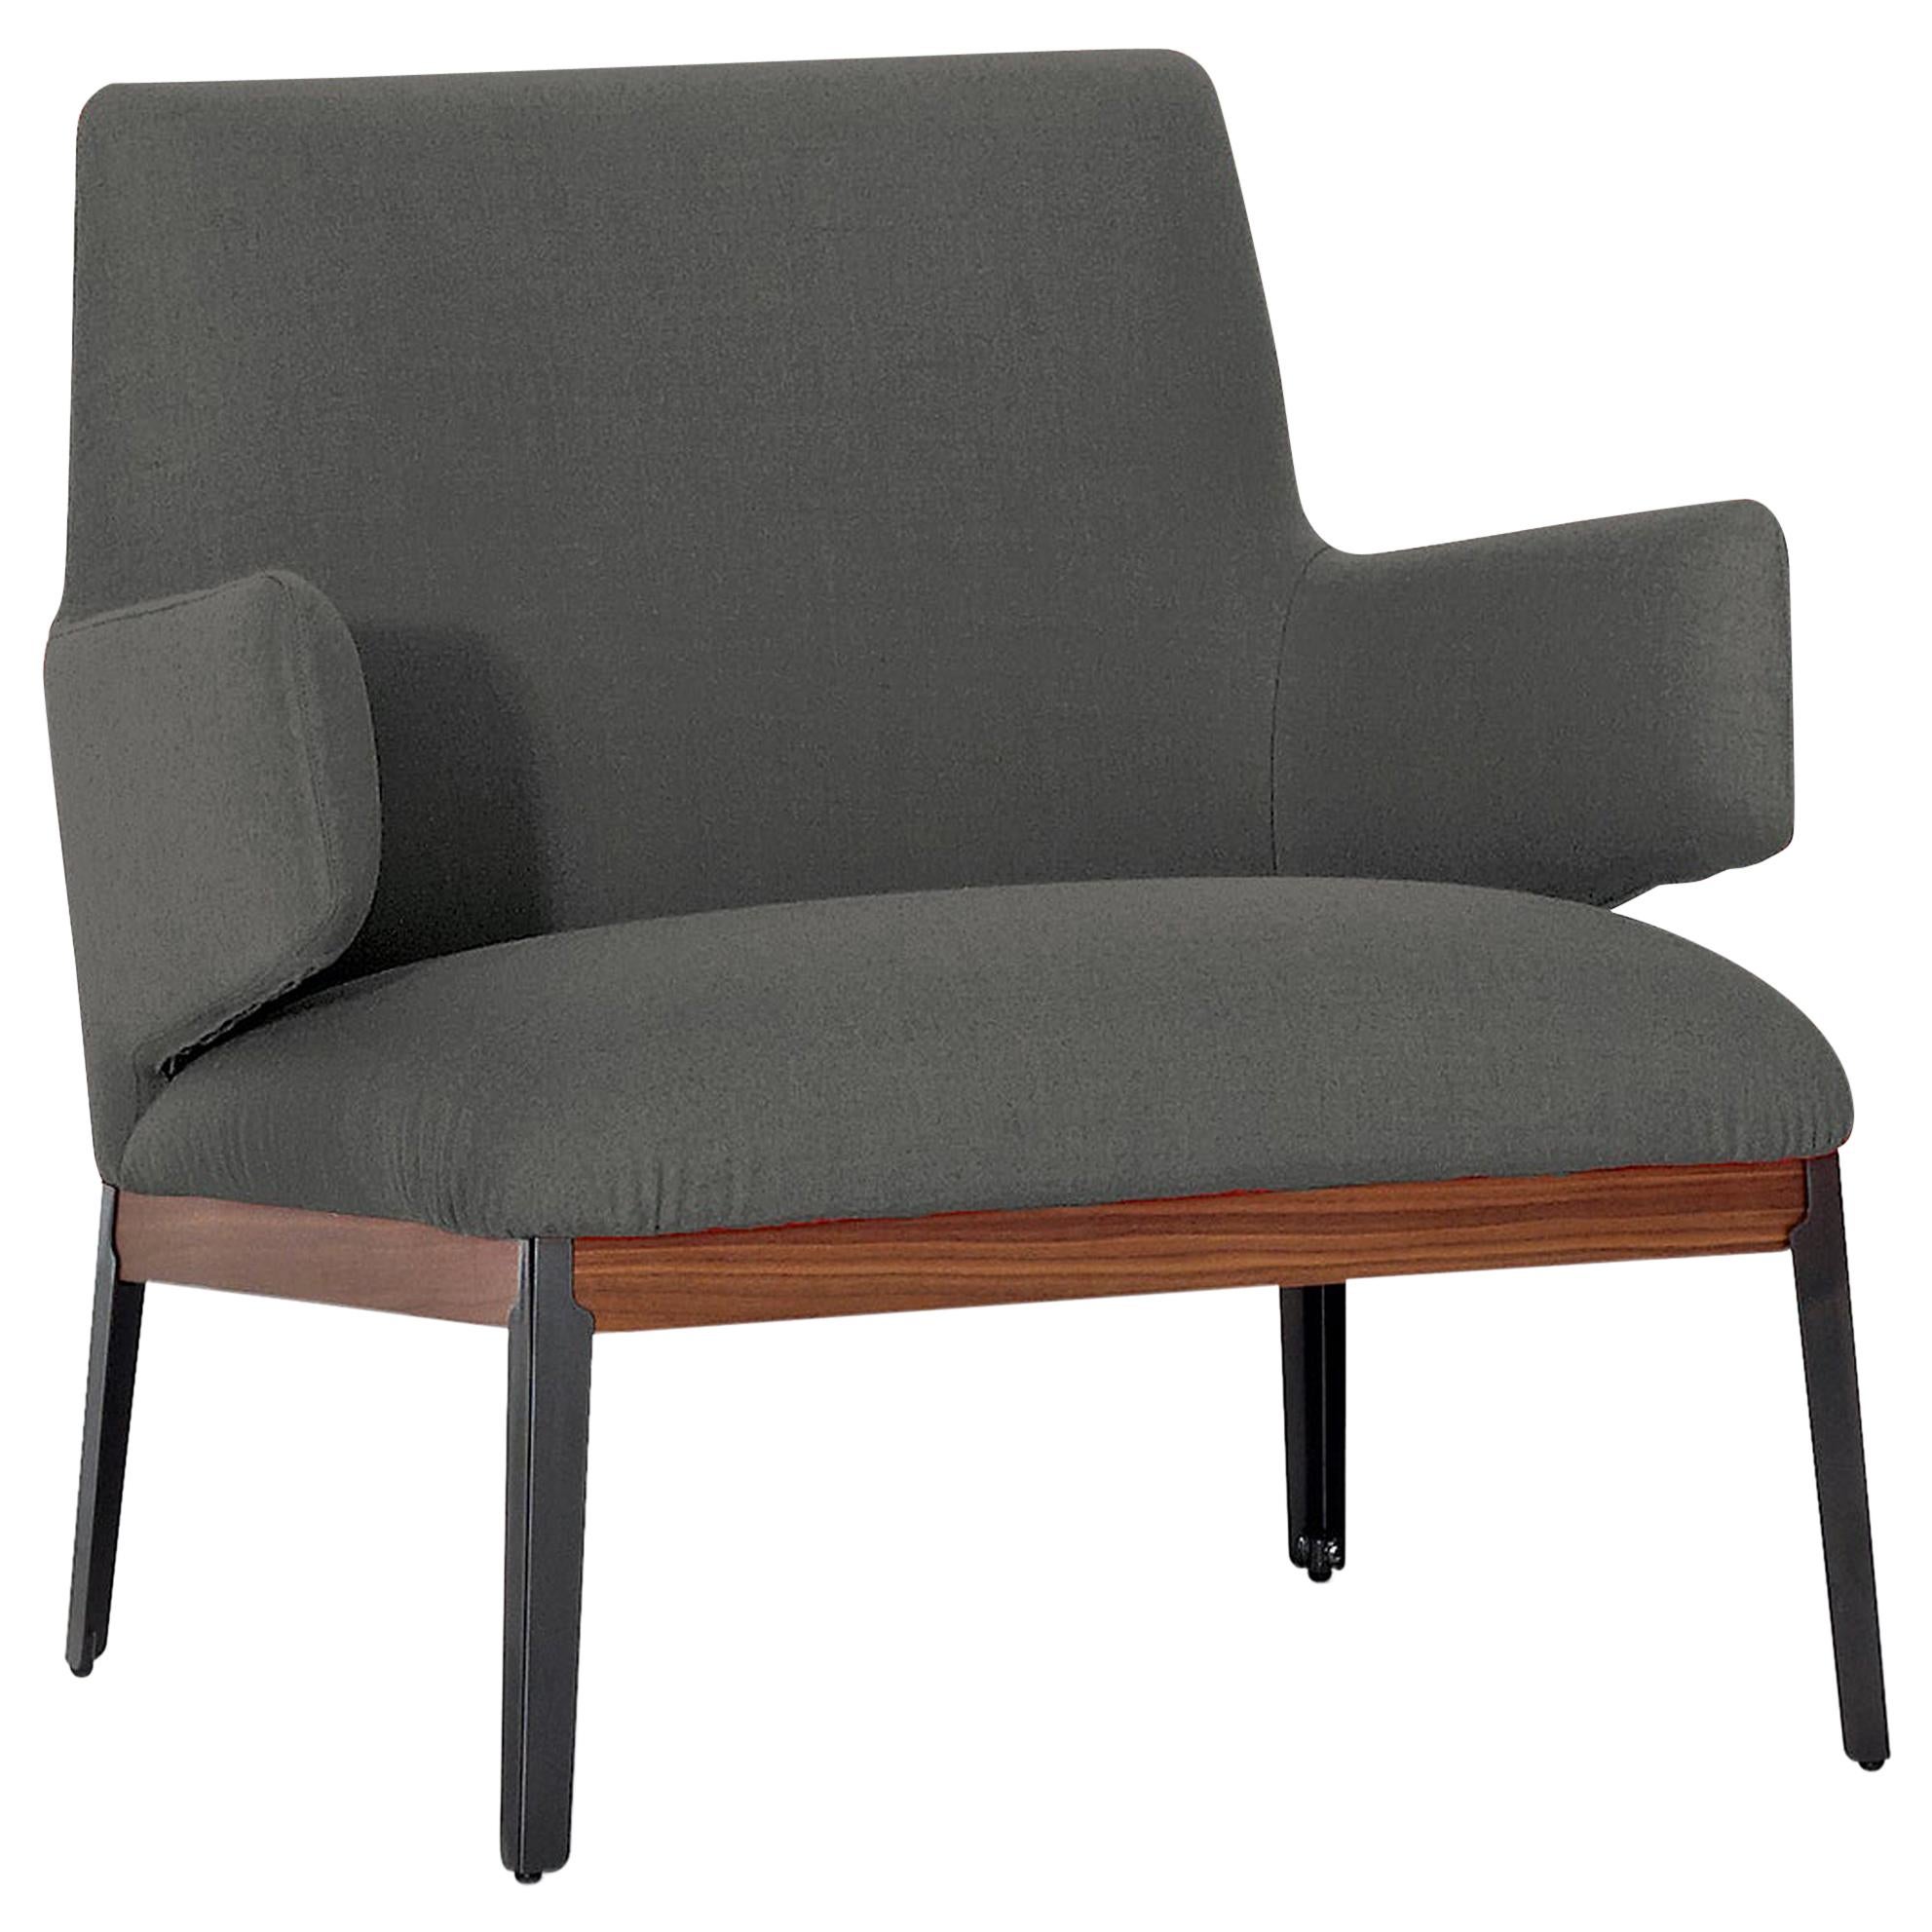 Arflex Hug Armchair with Low Backrest in Grey Fabric by Claesson Koivisto Rune For Sale